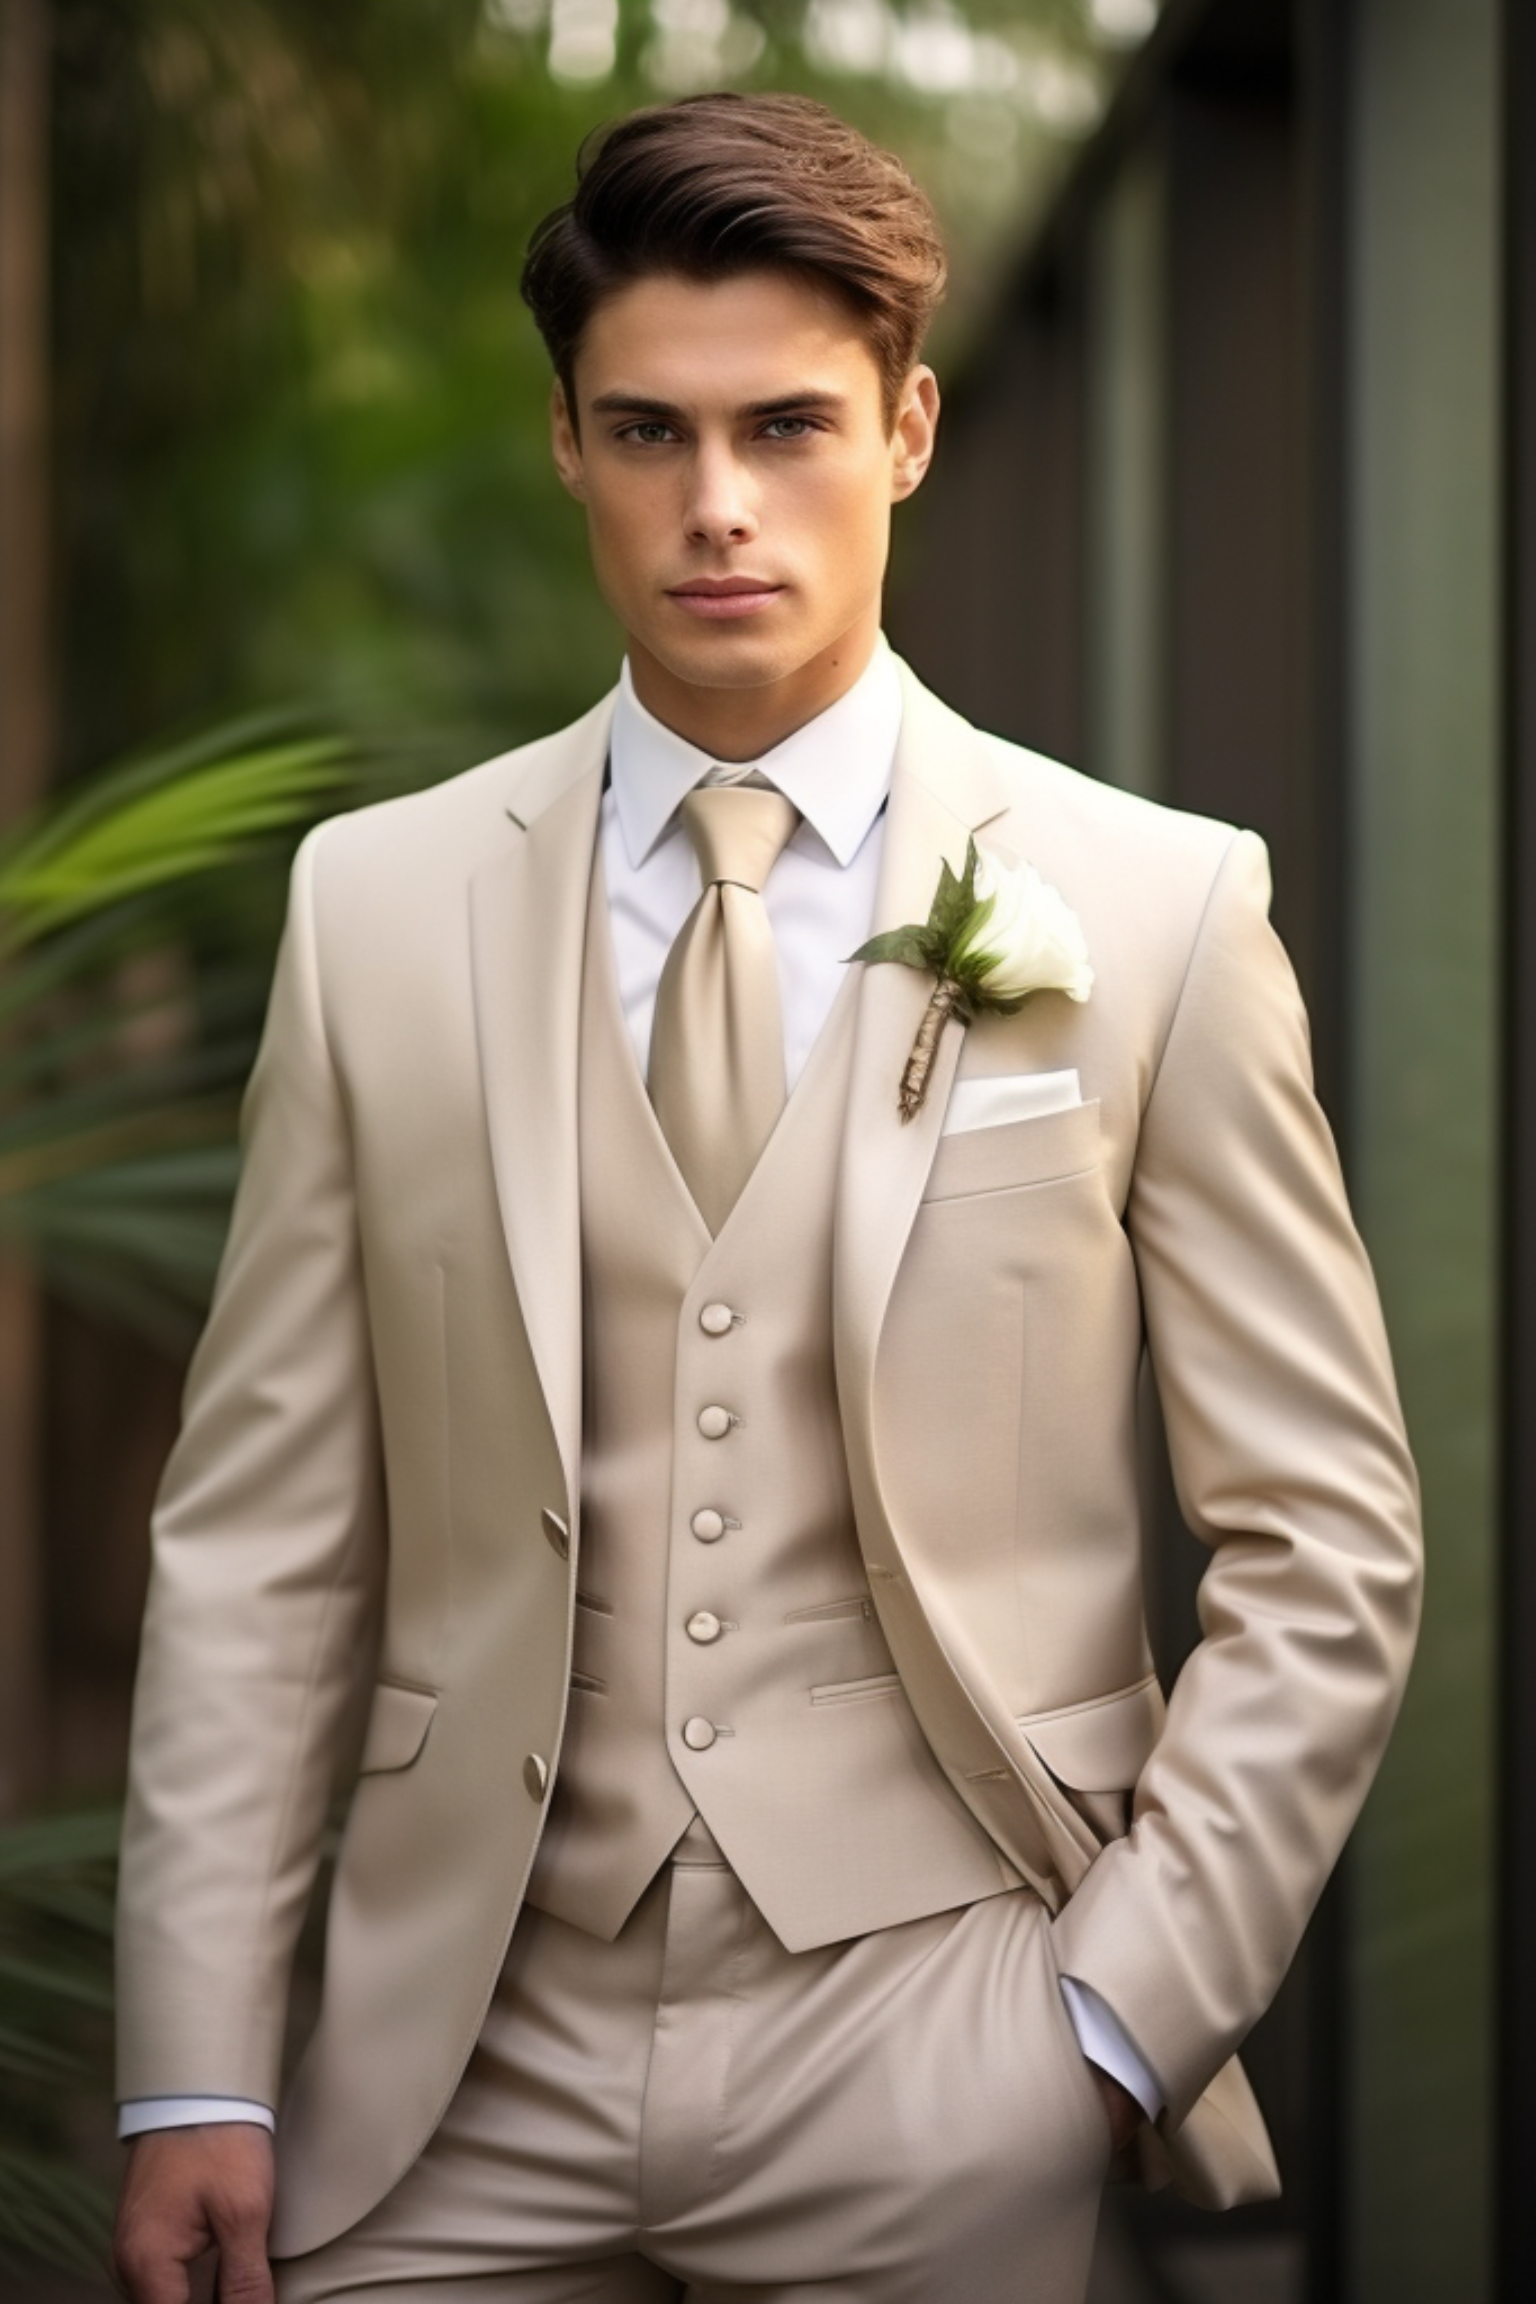 Chic Champagne Men's Three-Piece Suit - Sophisticated Business and